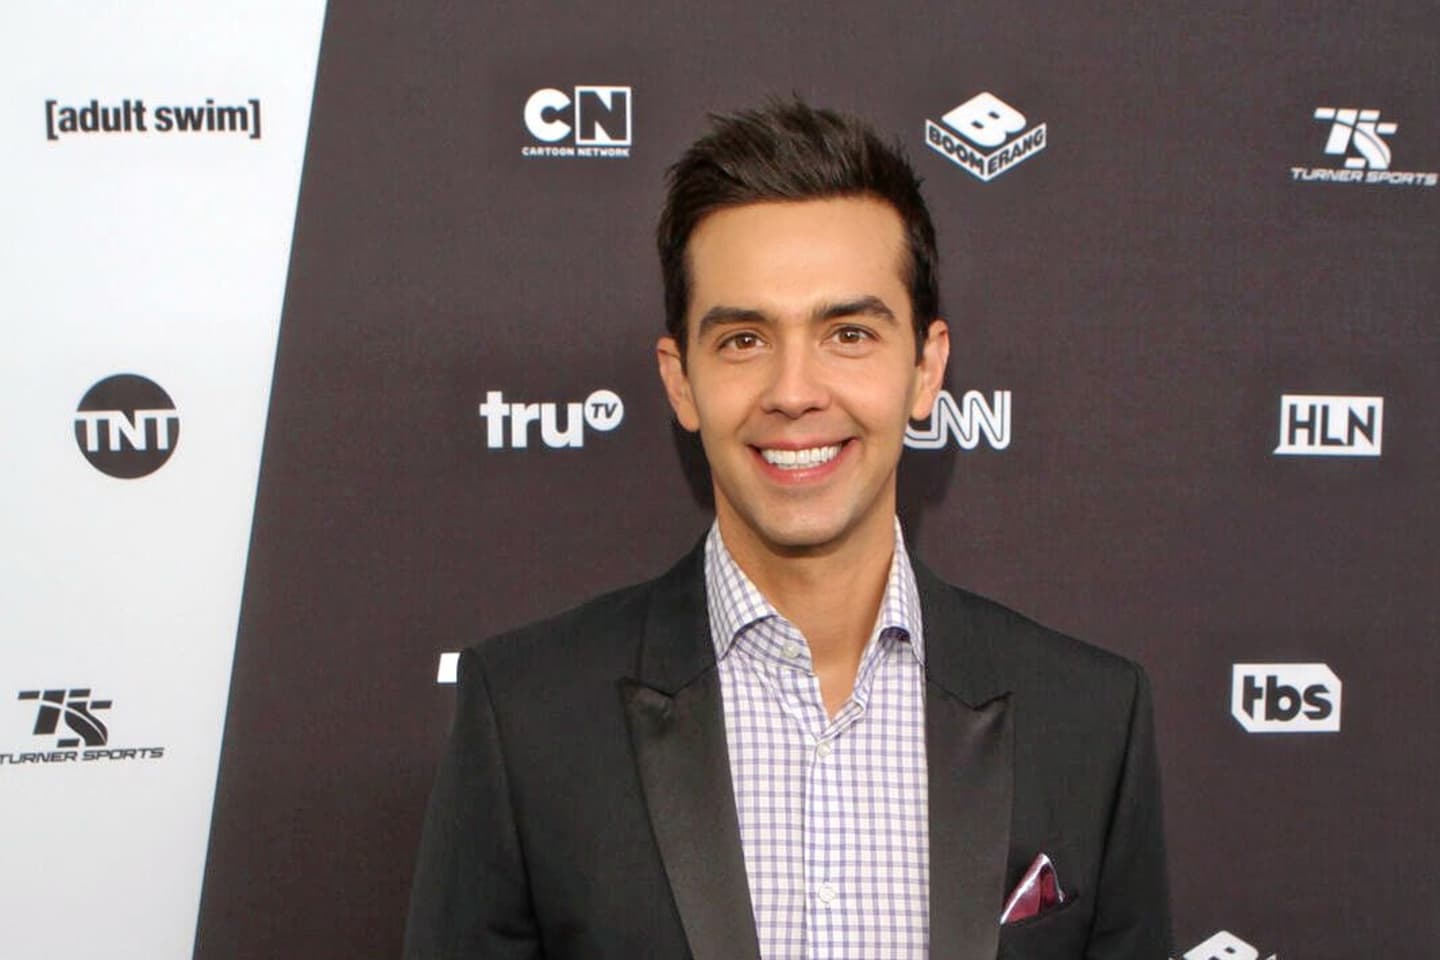 Michael Carbonaro Tickets Buy or Sell Tickets for Michael Carbonaro